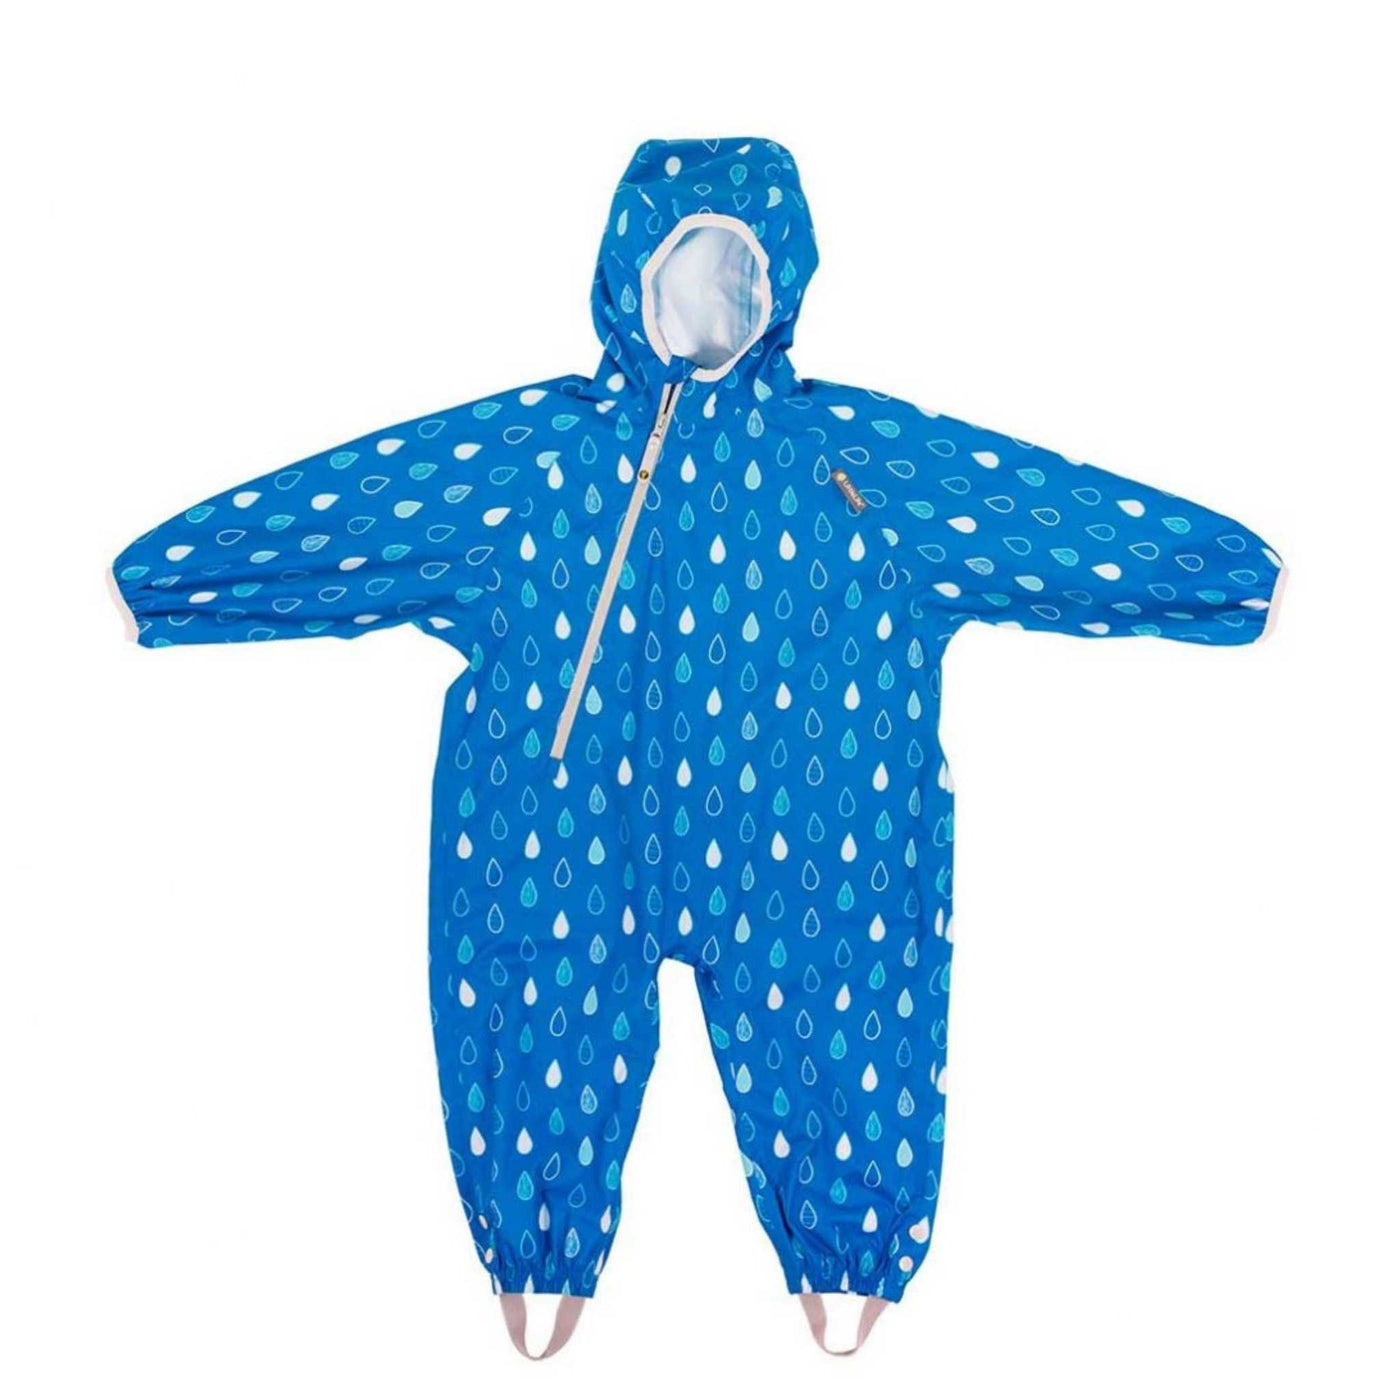 Littlelife Kids Waterproof All In One Suit | Kid's Outdoor Clothing NZ | Further Faster Christchurch NZ #raindrops